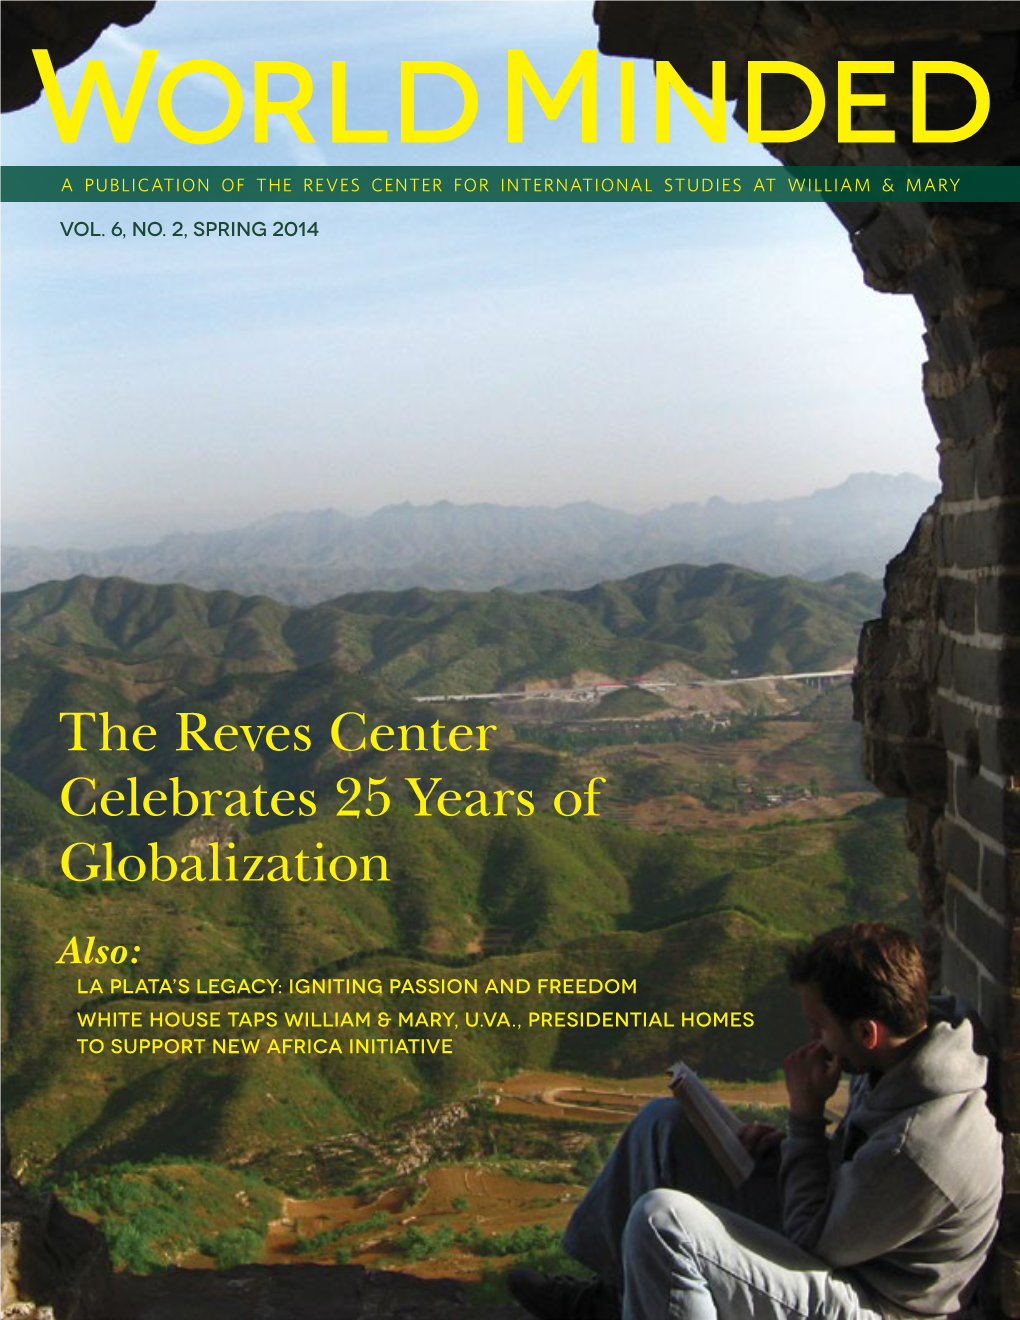 The Reves Center Celebrates 25 Years of Globalization